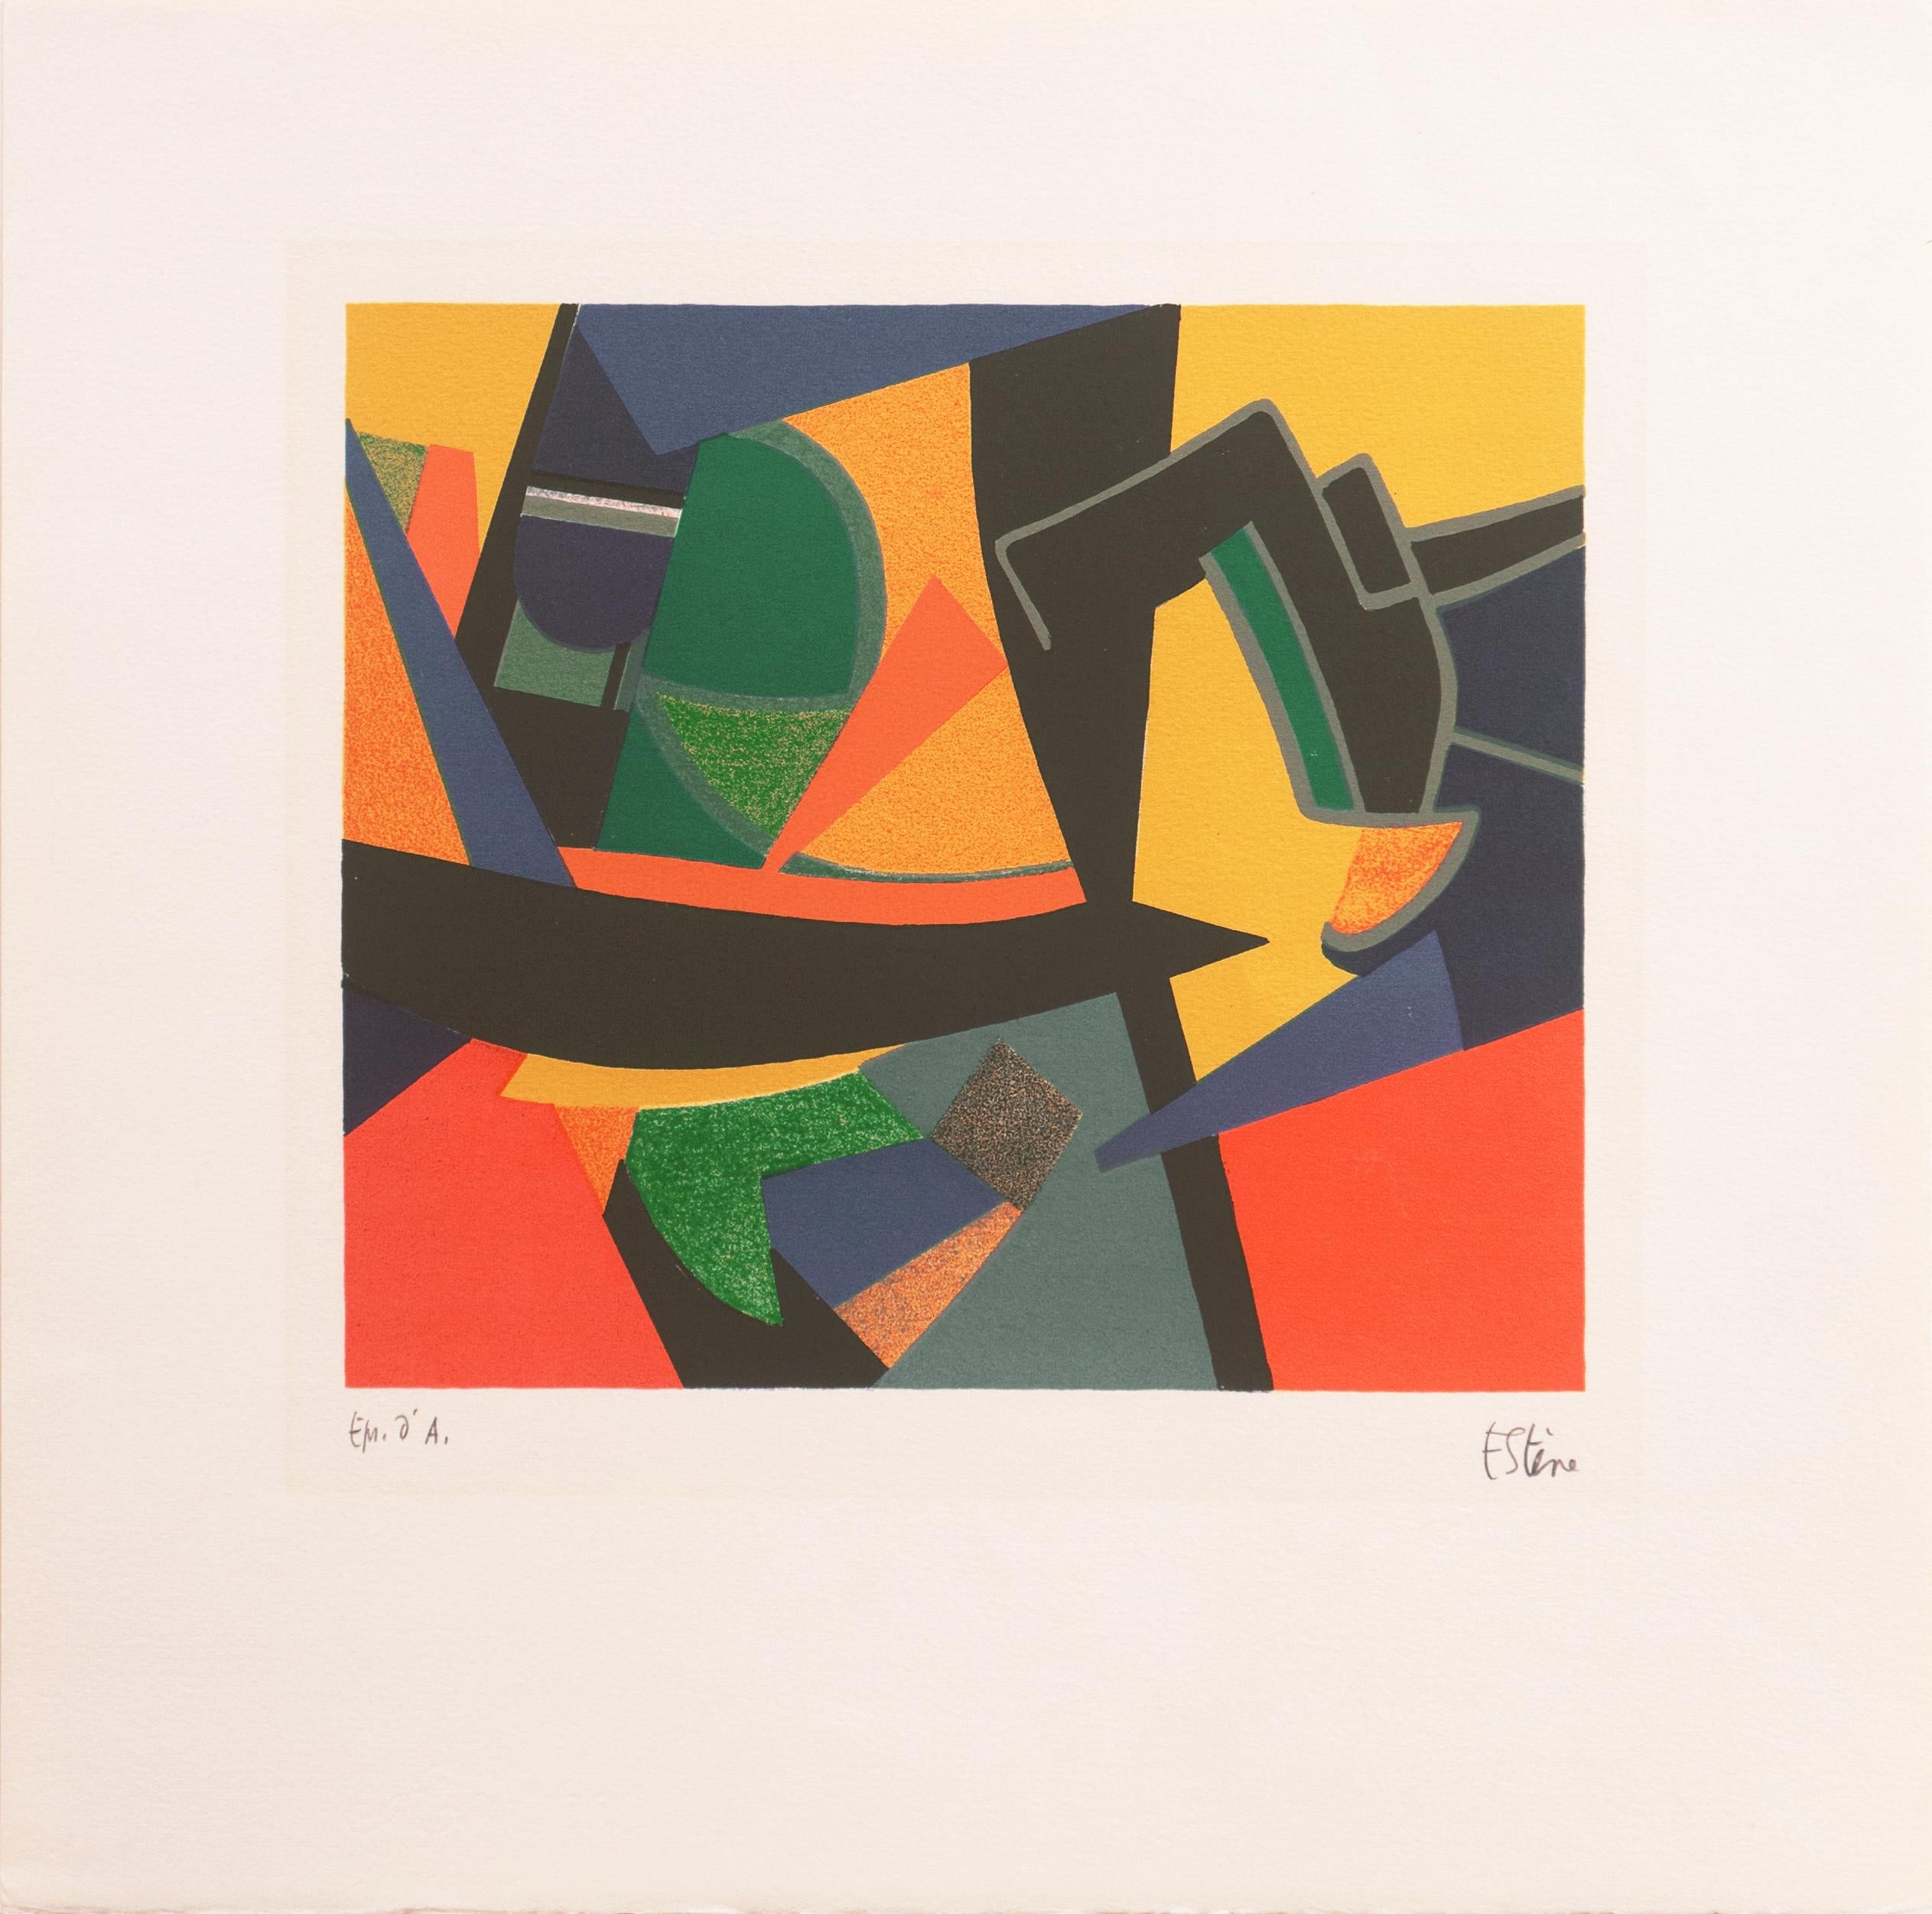 'Abstract in Coral and Gold', Academie Colarossi, Grand Prix National des Arts - Print by Maurice Estève